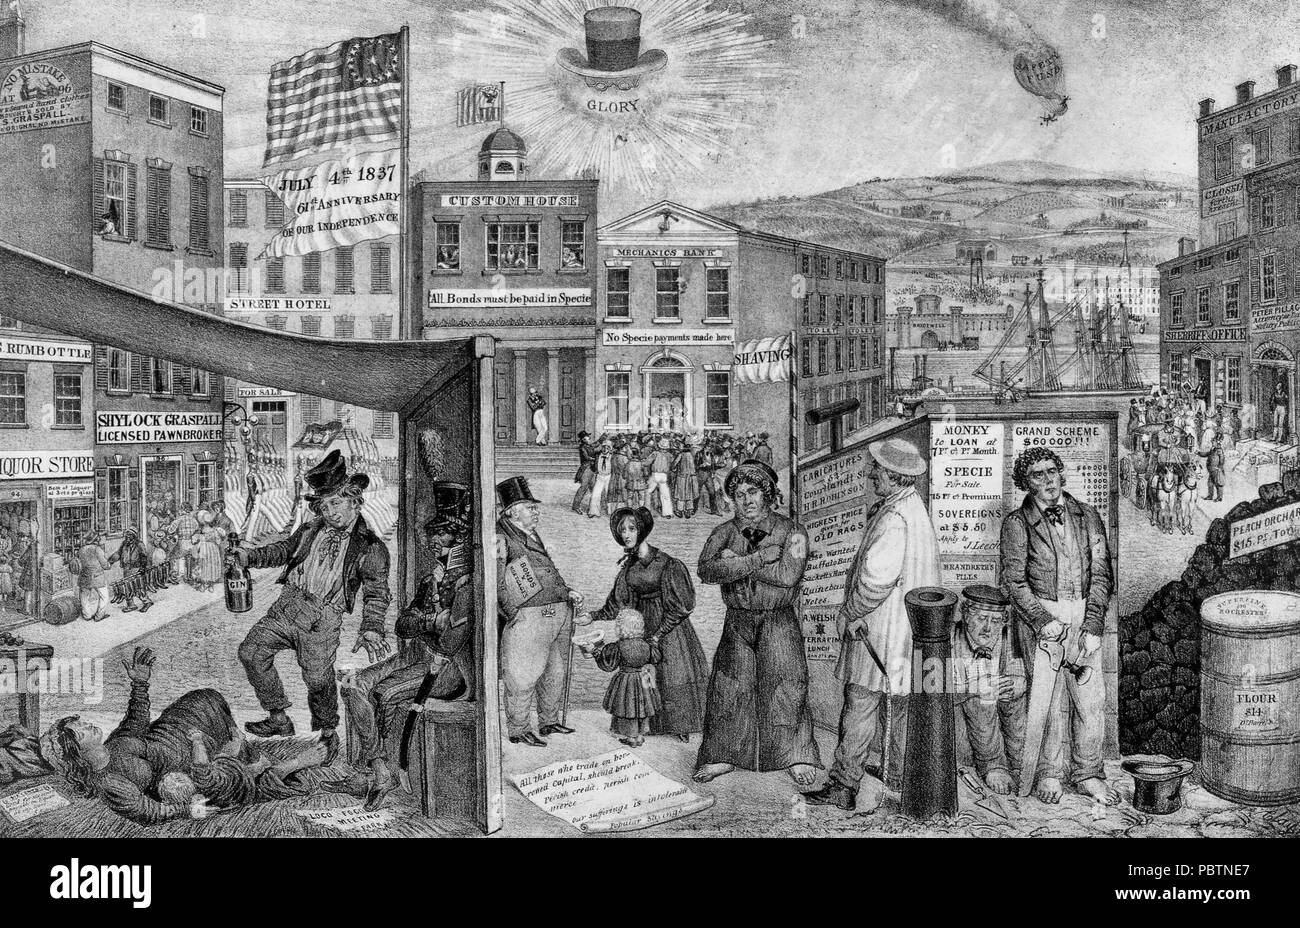 A commentary on the depressed state of the American economy, particularly  in New York, during the financial panic of 1837. Again, the blame is laid  on the treasury policies of Andrew Jackson